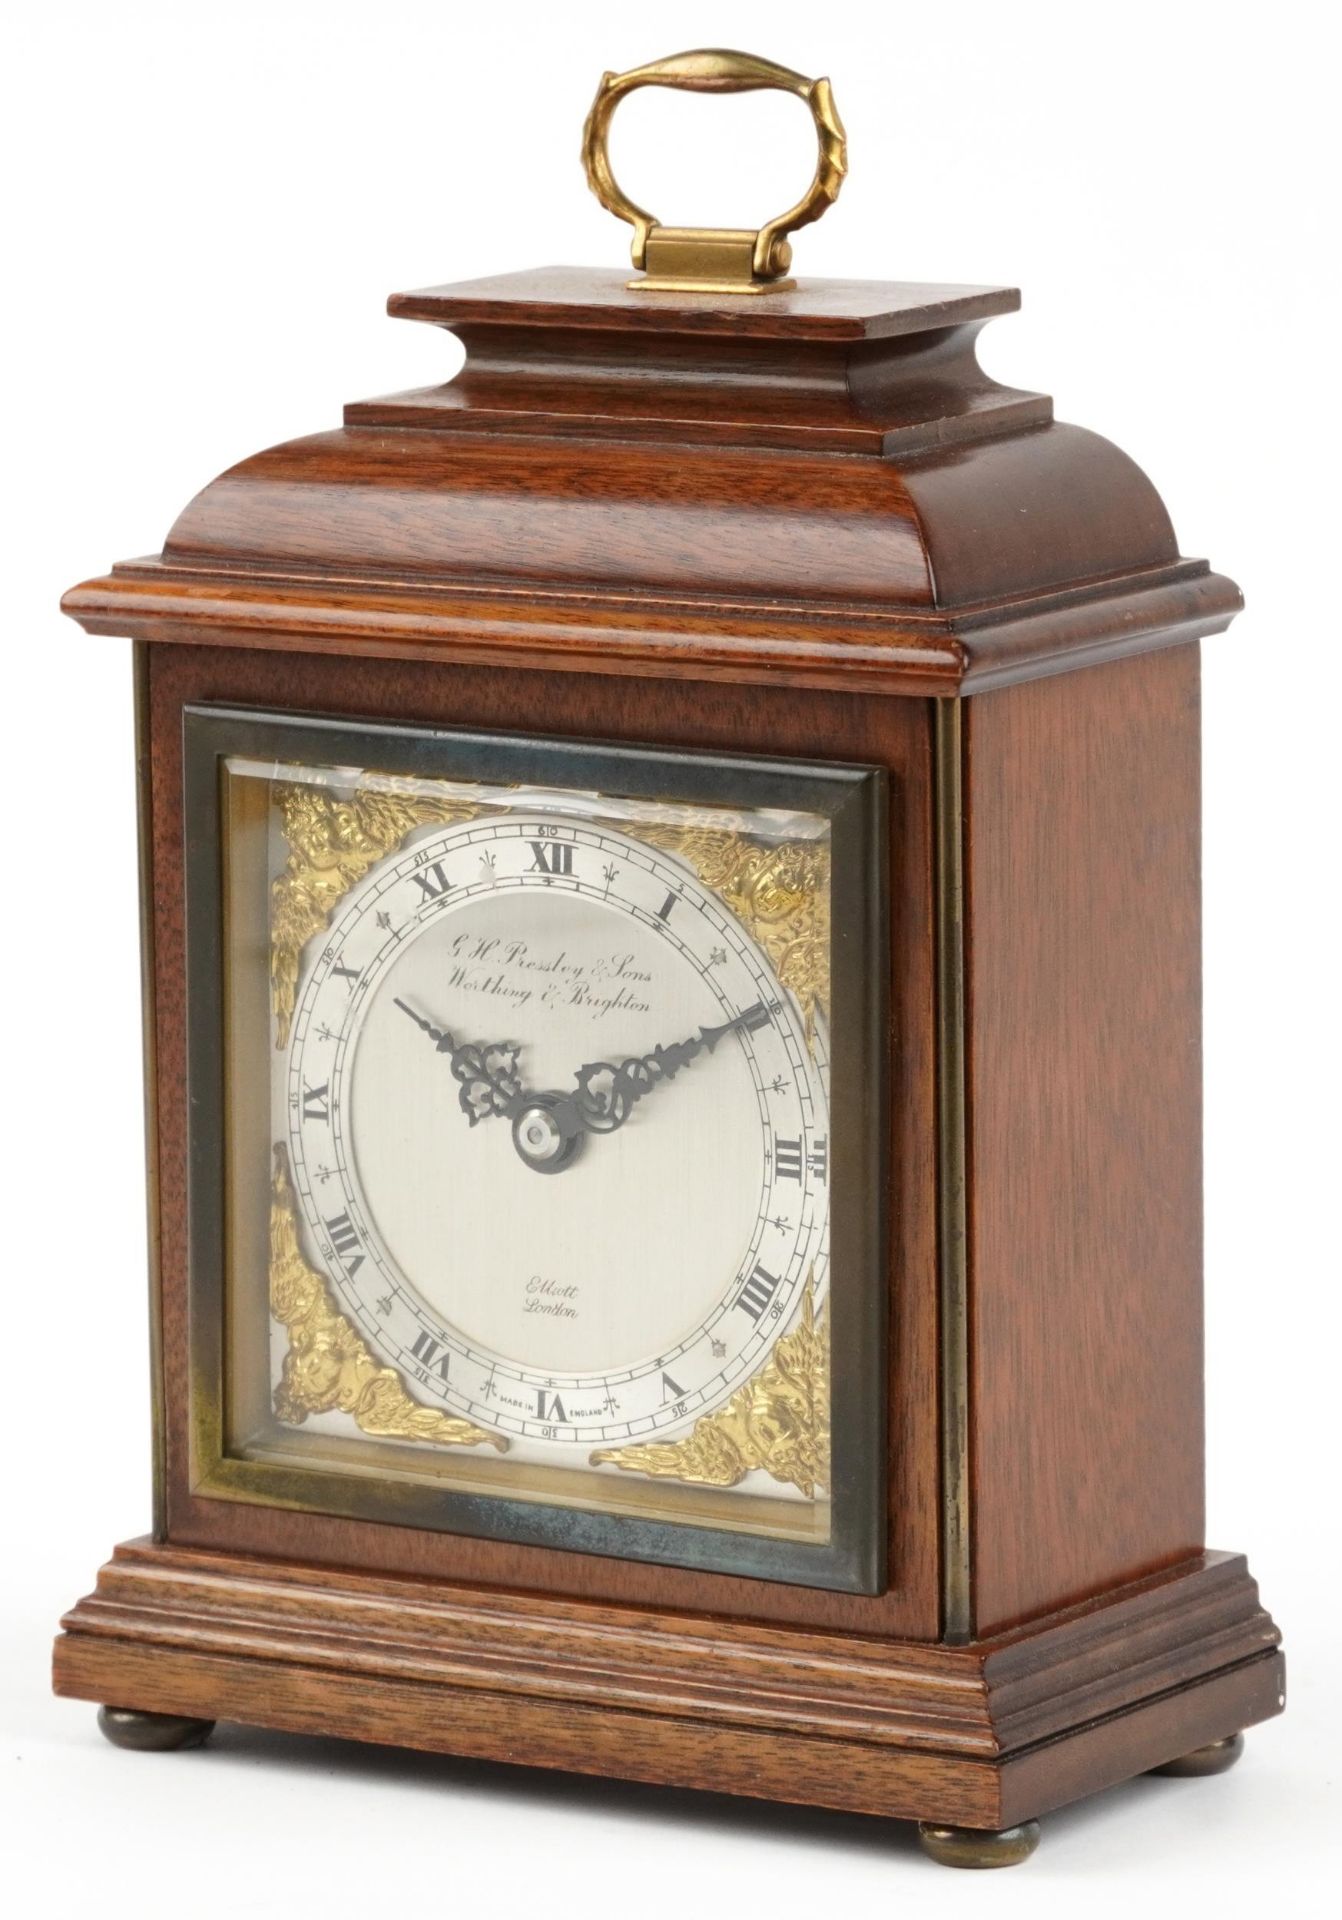 Mahogany cased Elliott bracket type mantle clock with silvered dial and circular chapter ring having